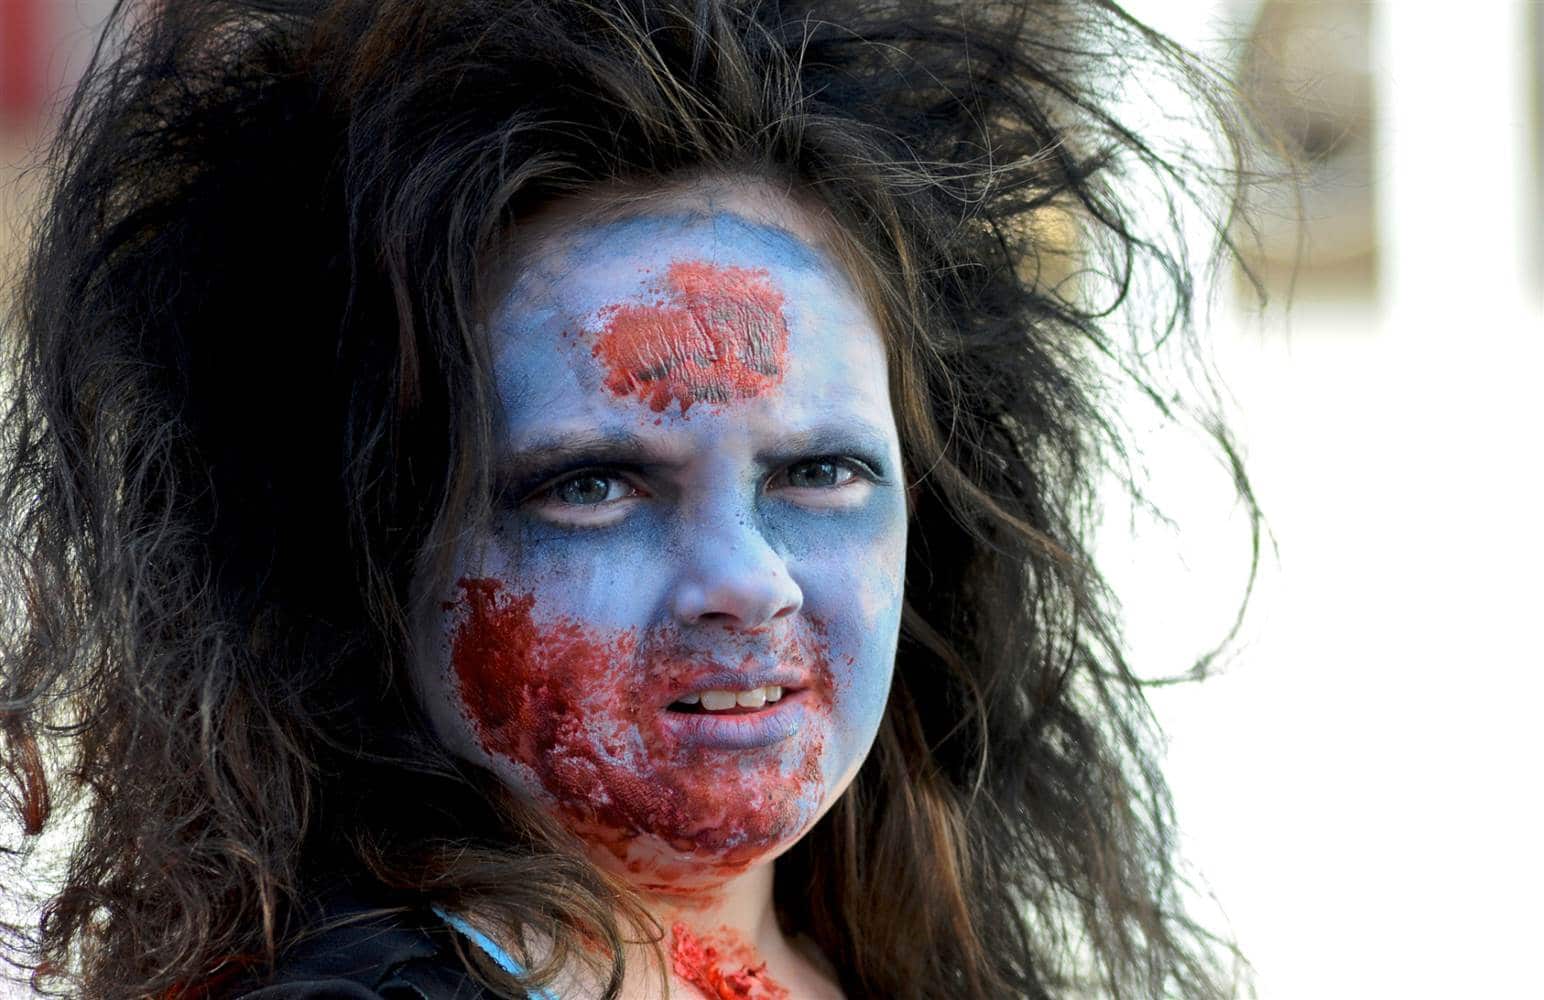 China-made Halloween Makeup May Contain Lead, Other Toxic Chemicals